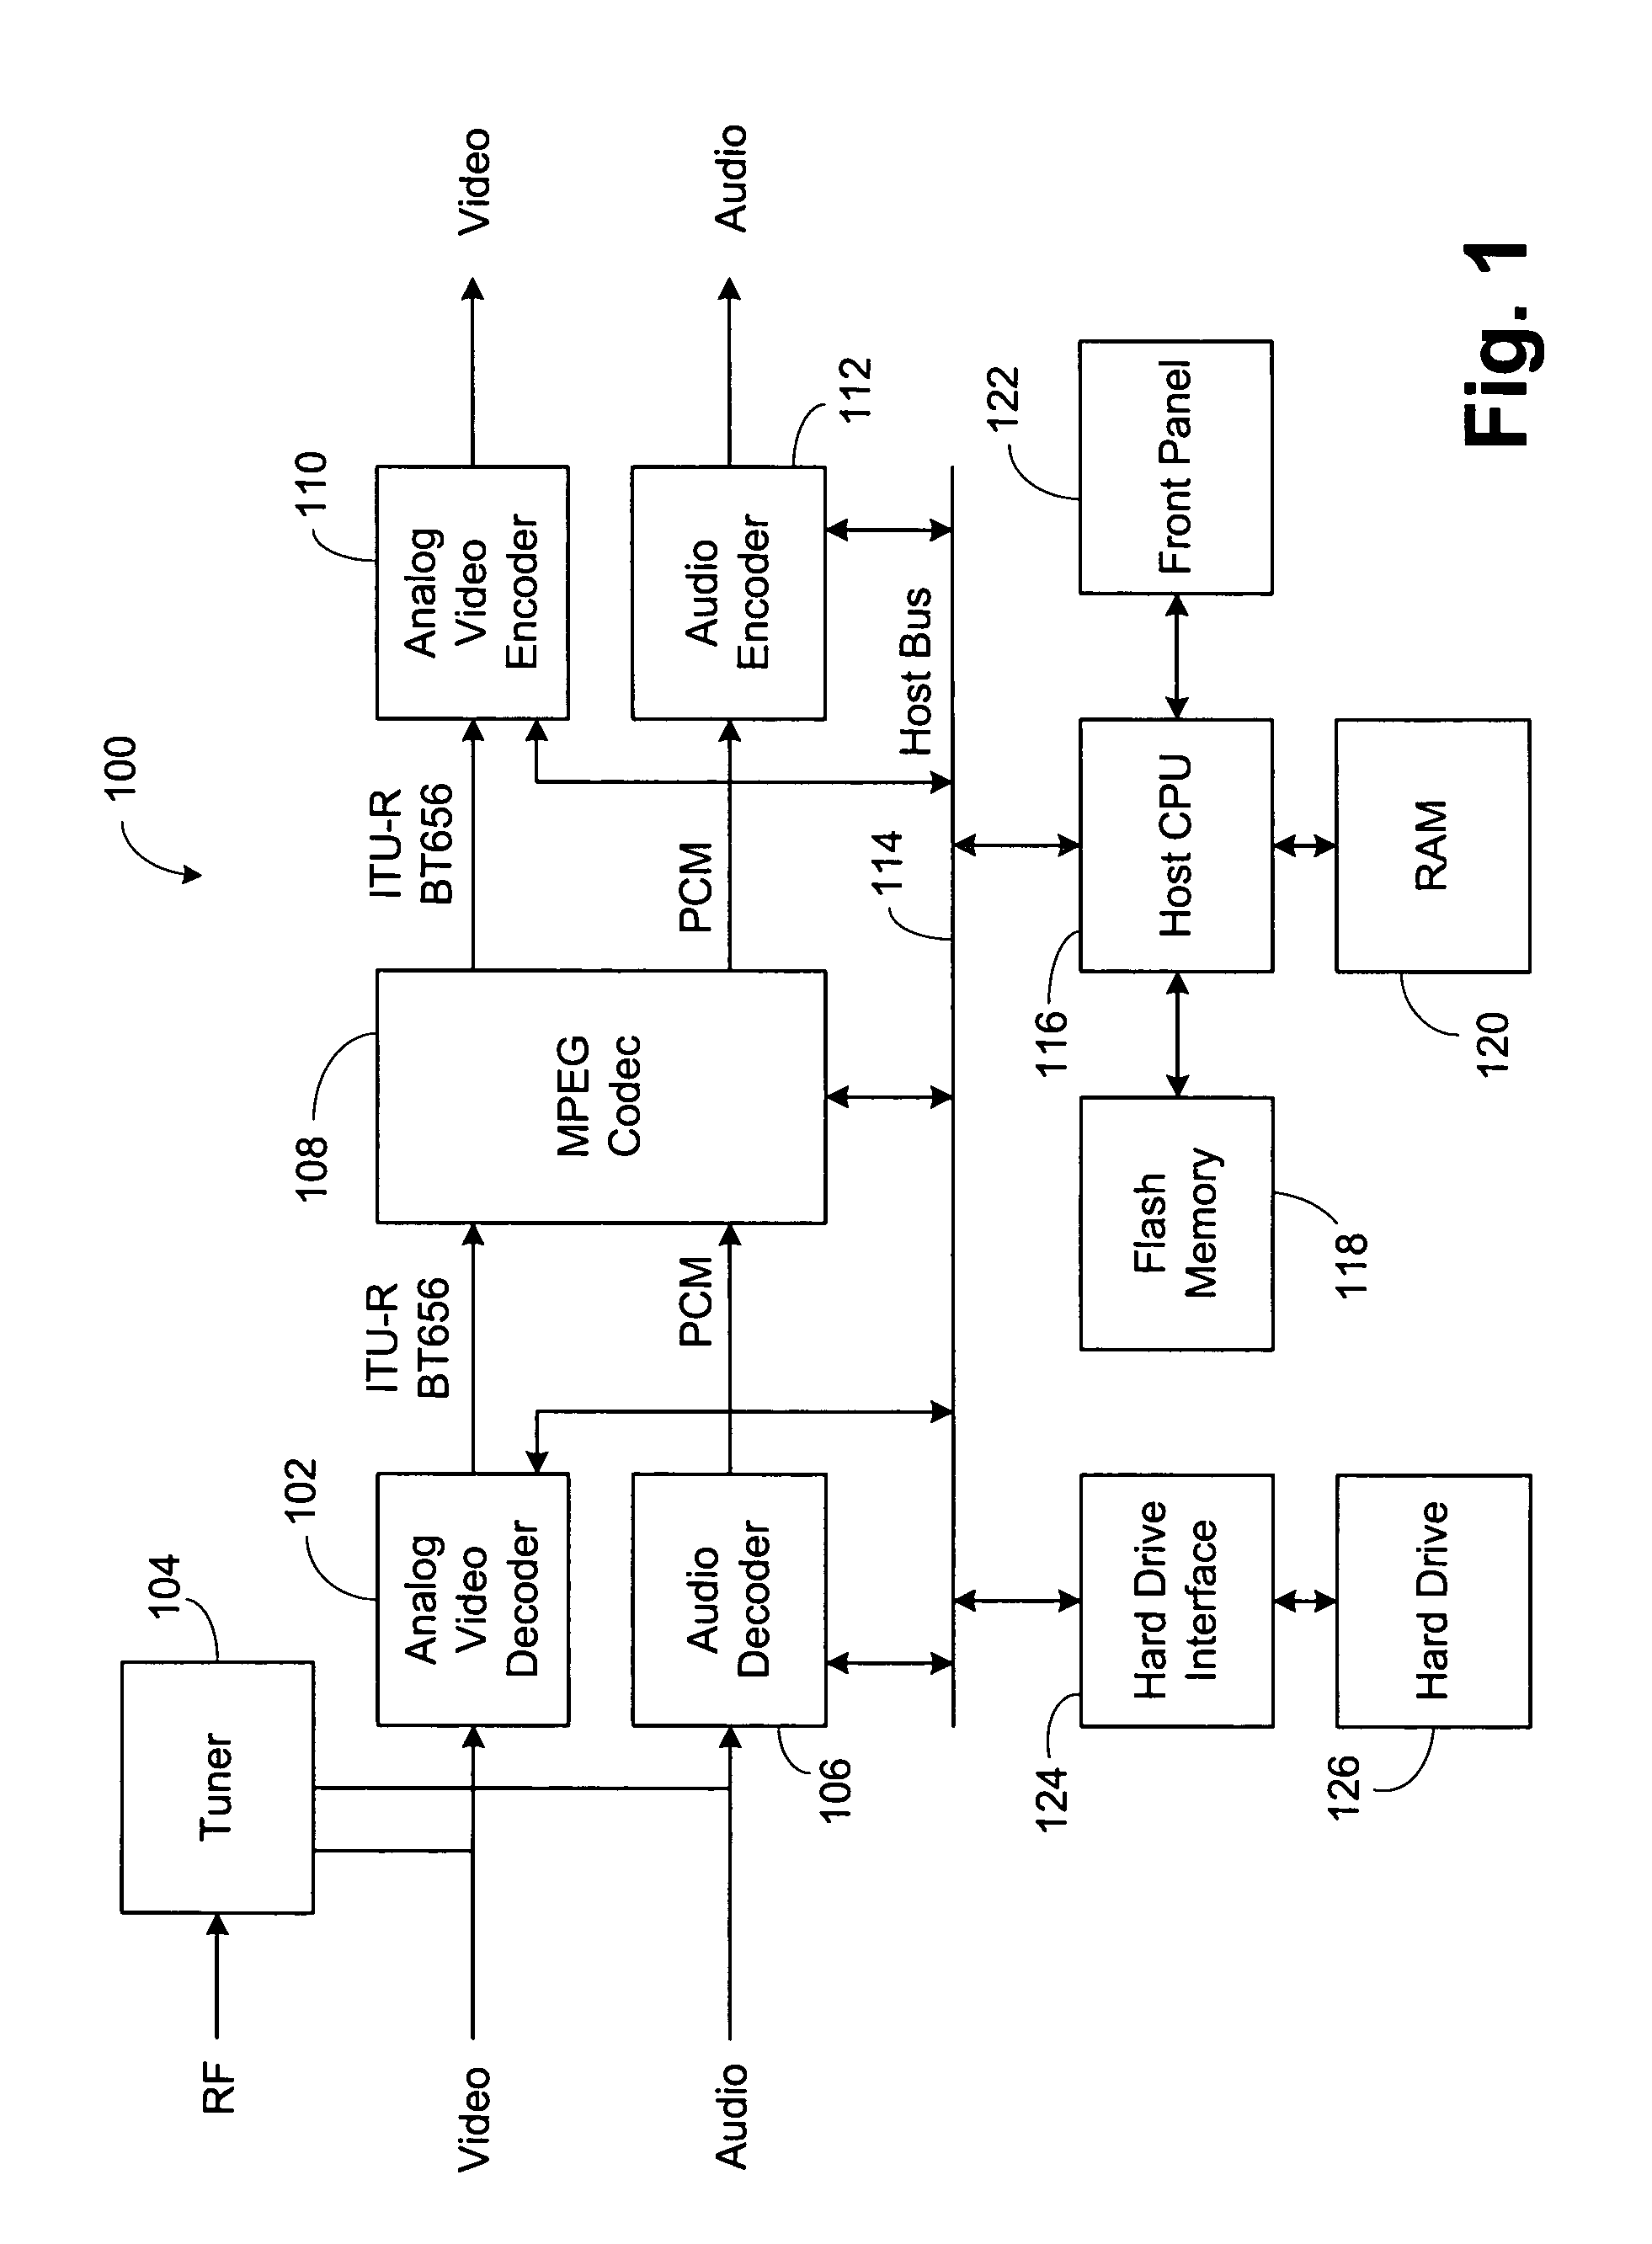 Method and apparatus to interface video signals to a decoder to compensate for droop